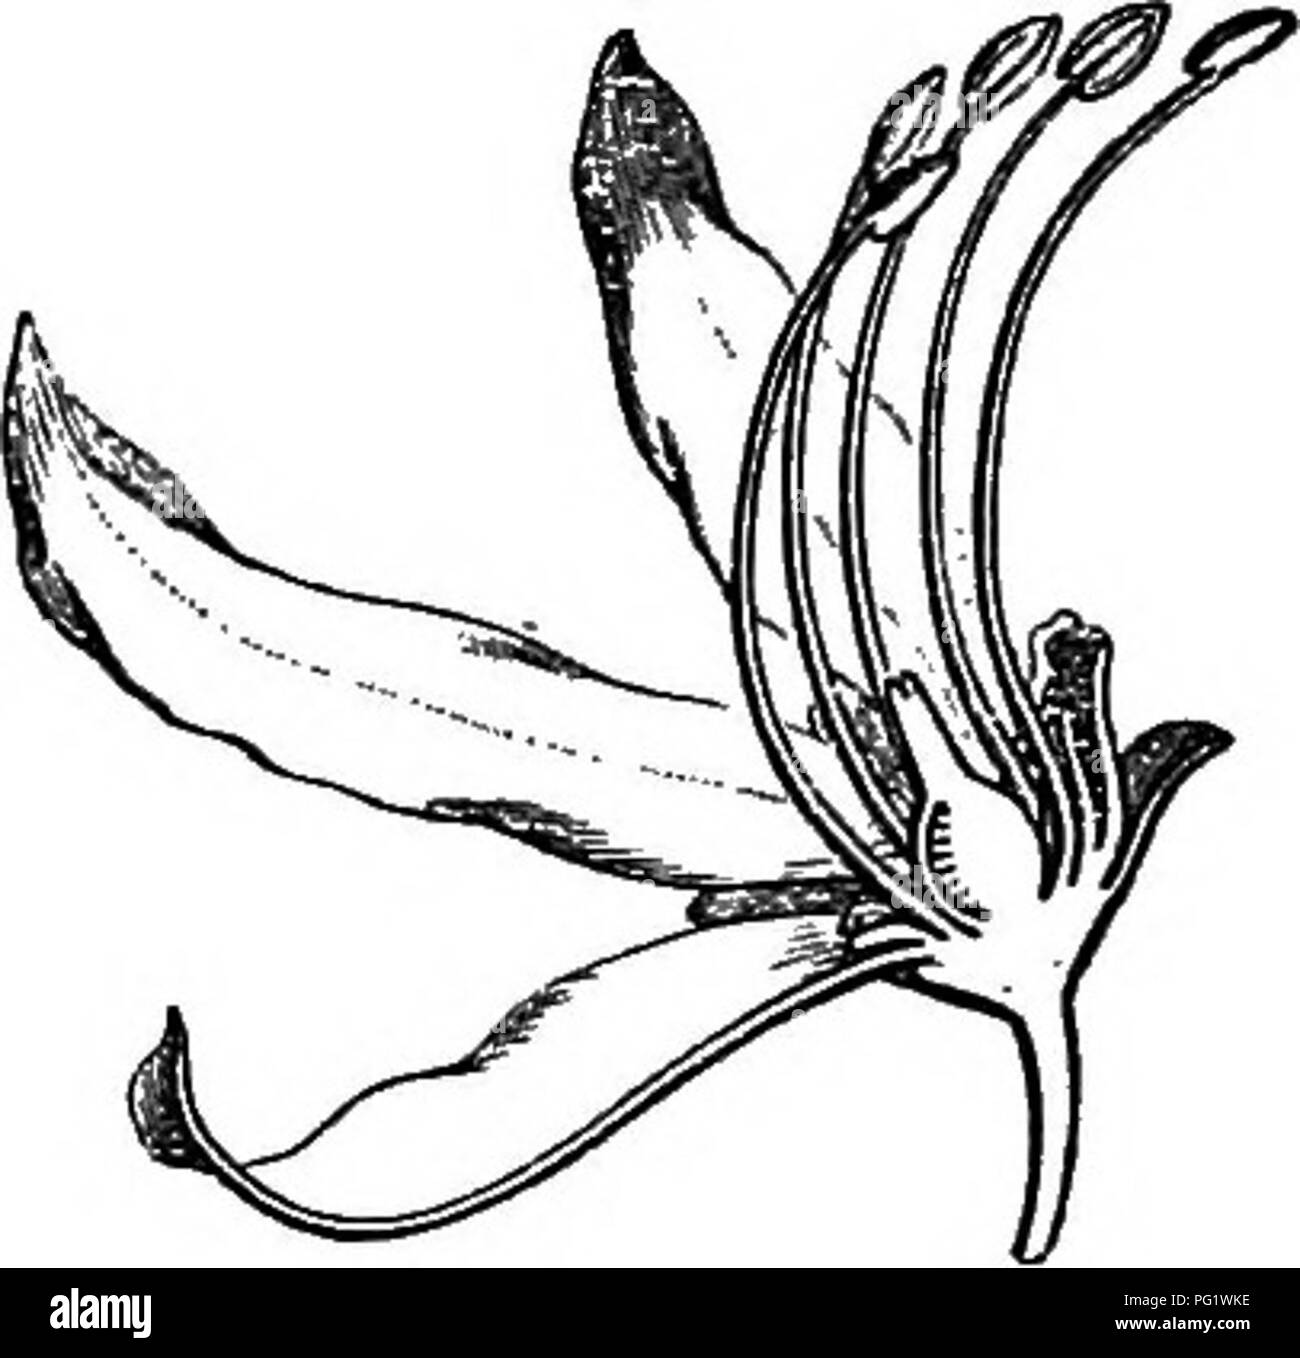 . The natural history of plants. Botany. Fig. 399. Male flower. Fig. 400. Longitudinal section of flower. Mcu/onia pubeseenf. having its perianth, the petals lined at the top of the claw with an appendage lobate and cut in tufts, to the number of four or five; and the three ovary cells each containing two ascendent ovules. But the fruit is a thick coriaceous capsule, depressed at the apex and apiculate, loculicidal. The exalbuminous seeds contain a fleshy embryo resembling that of JEsculus. Like Erithrophysa^. Ungnadia has early polygamous flowers, developed before the im- paripinnate leaves.  Stock Photo